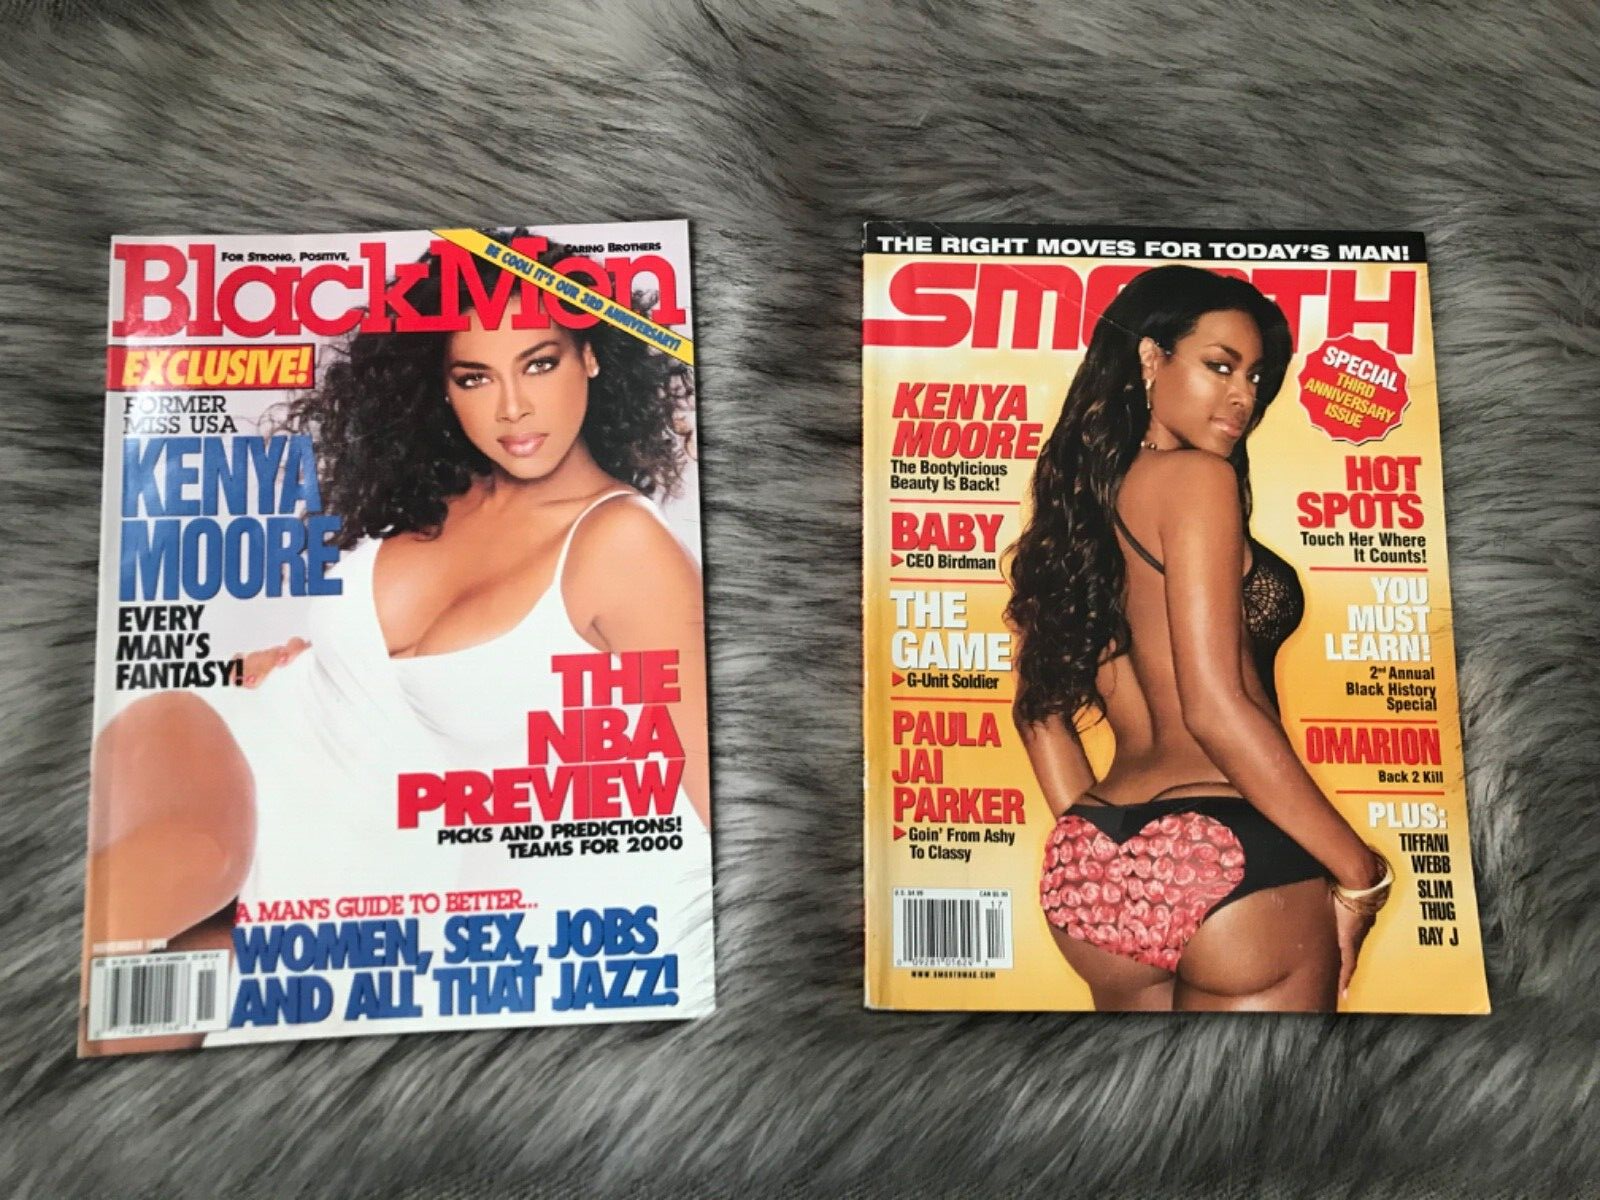 angelique palma recommends kenya moore playboy pic